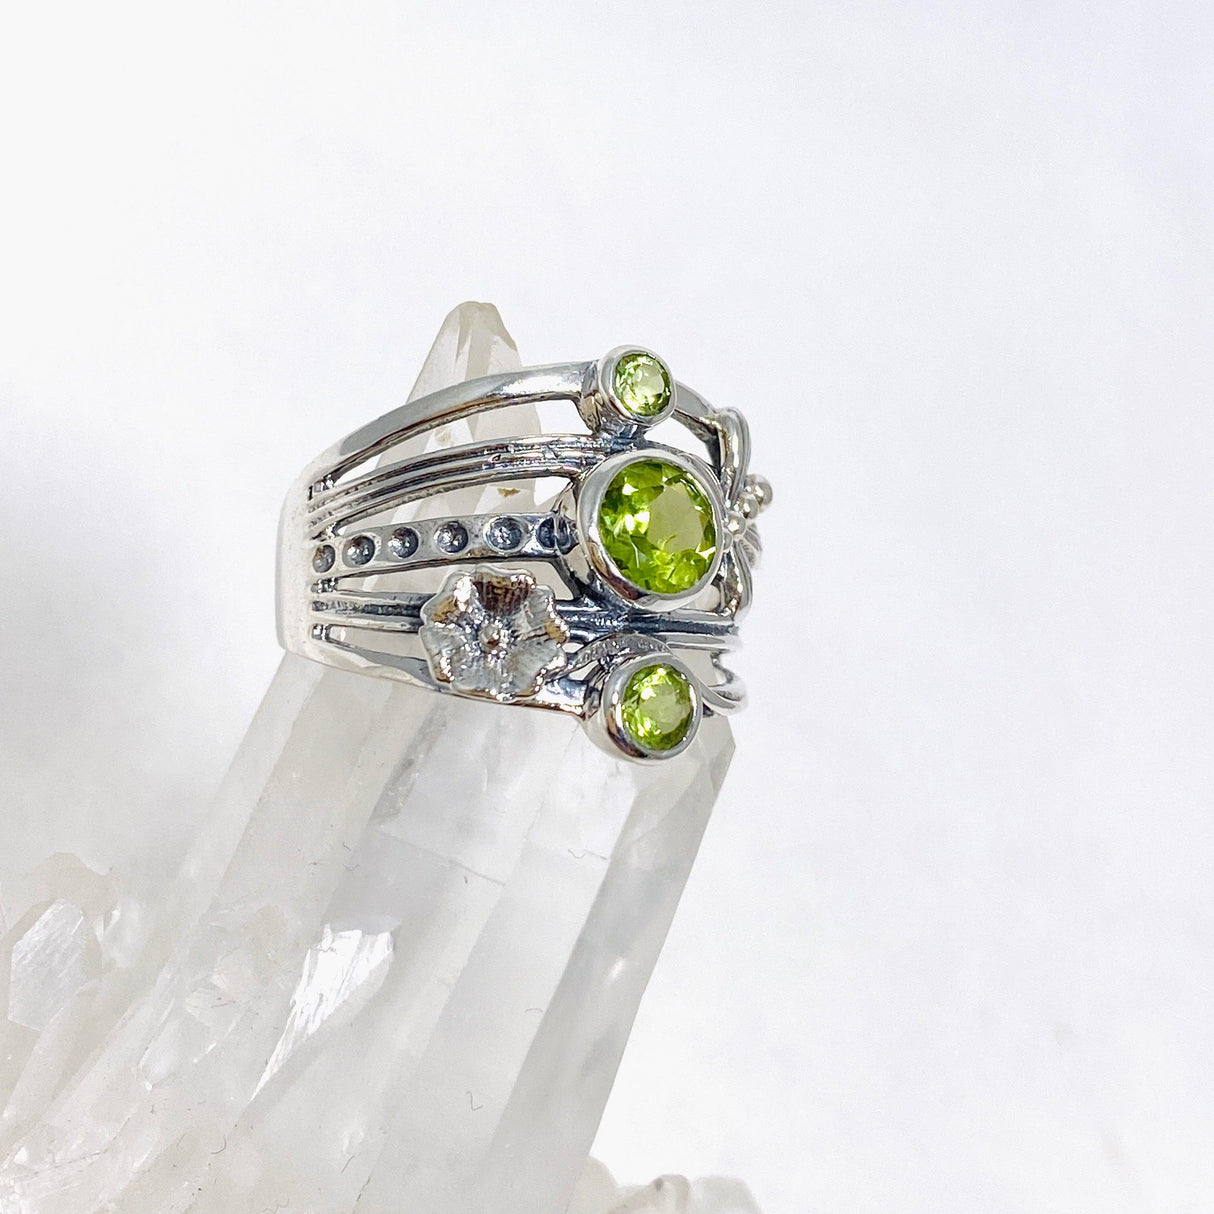 Peridot Faceted Multi-stone Ring with Floral accents R3890 - Nature's Magick